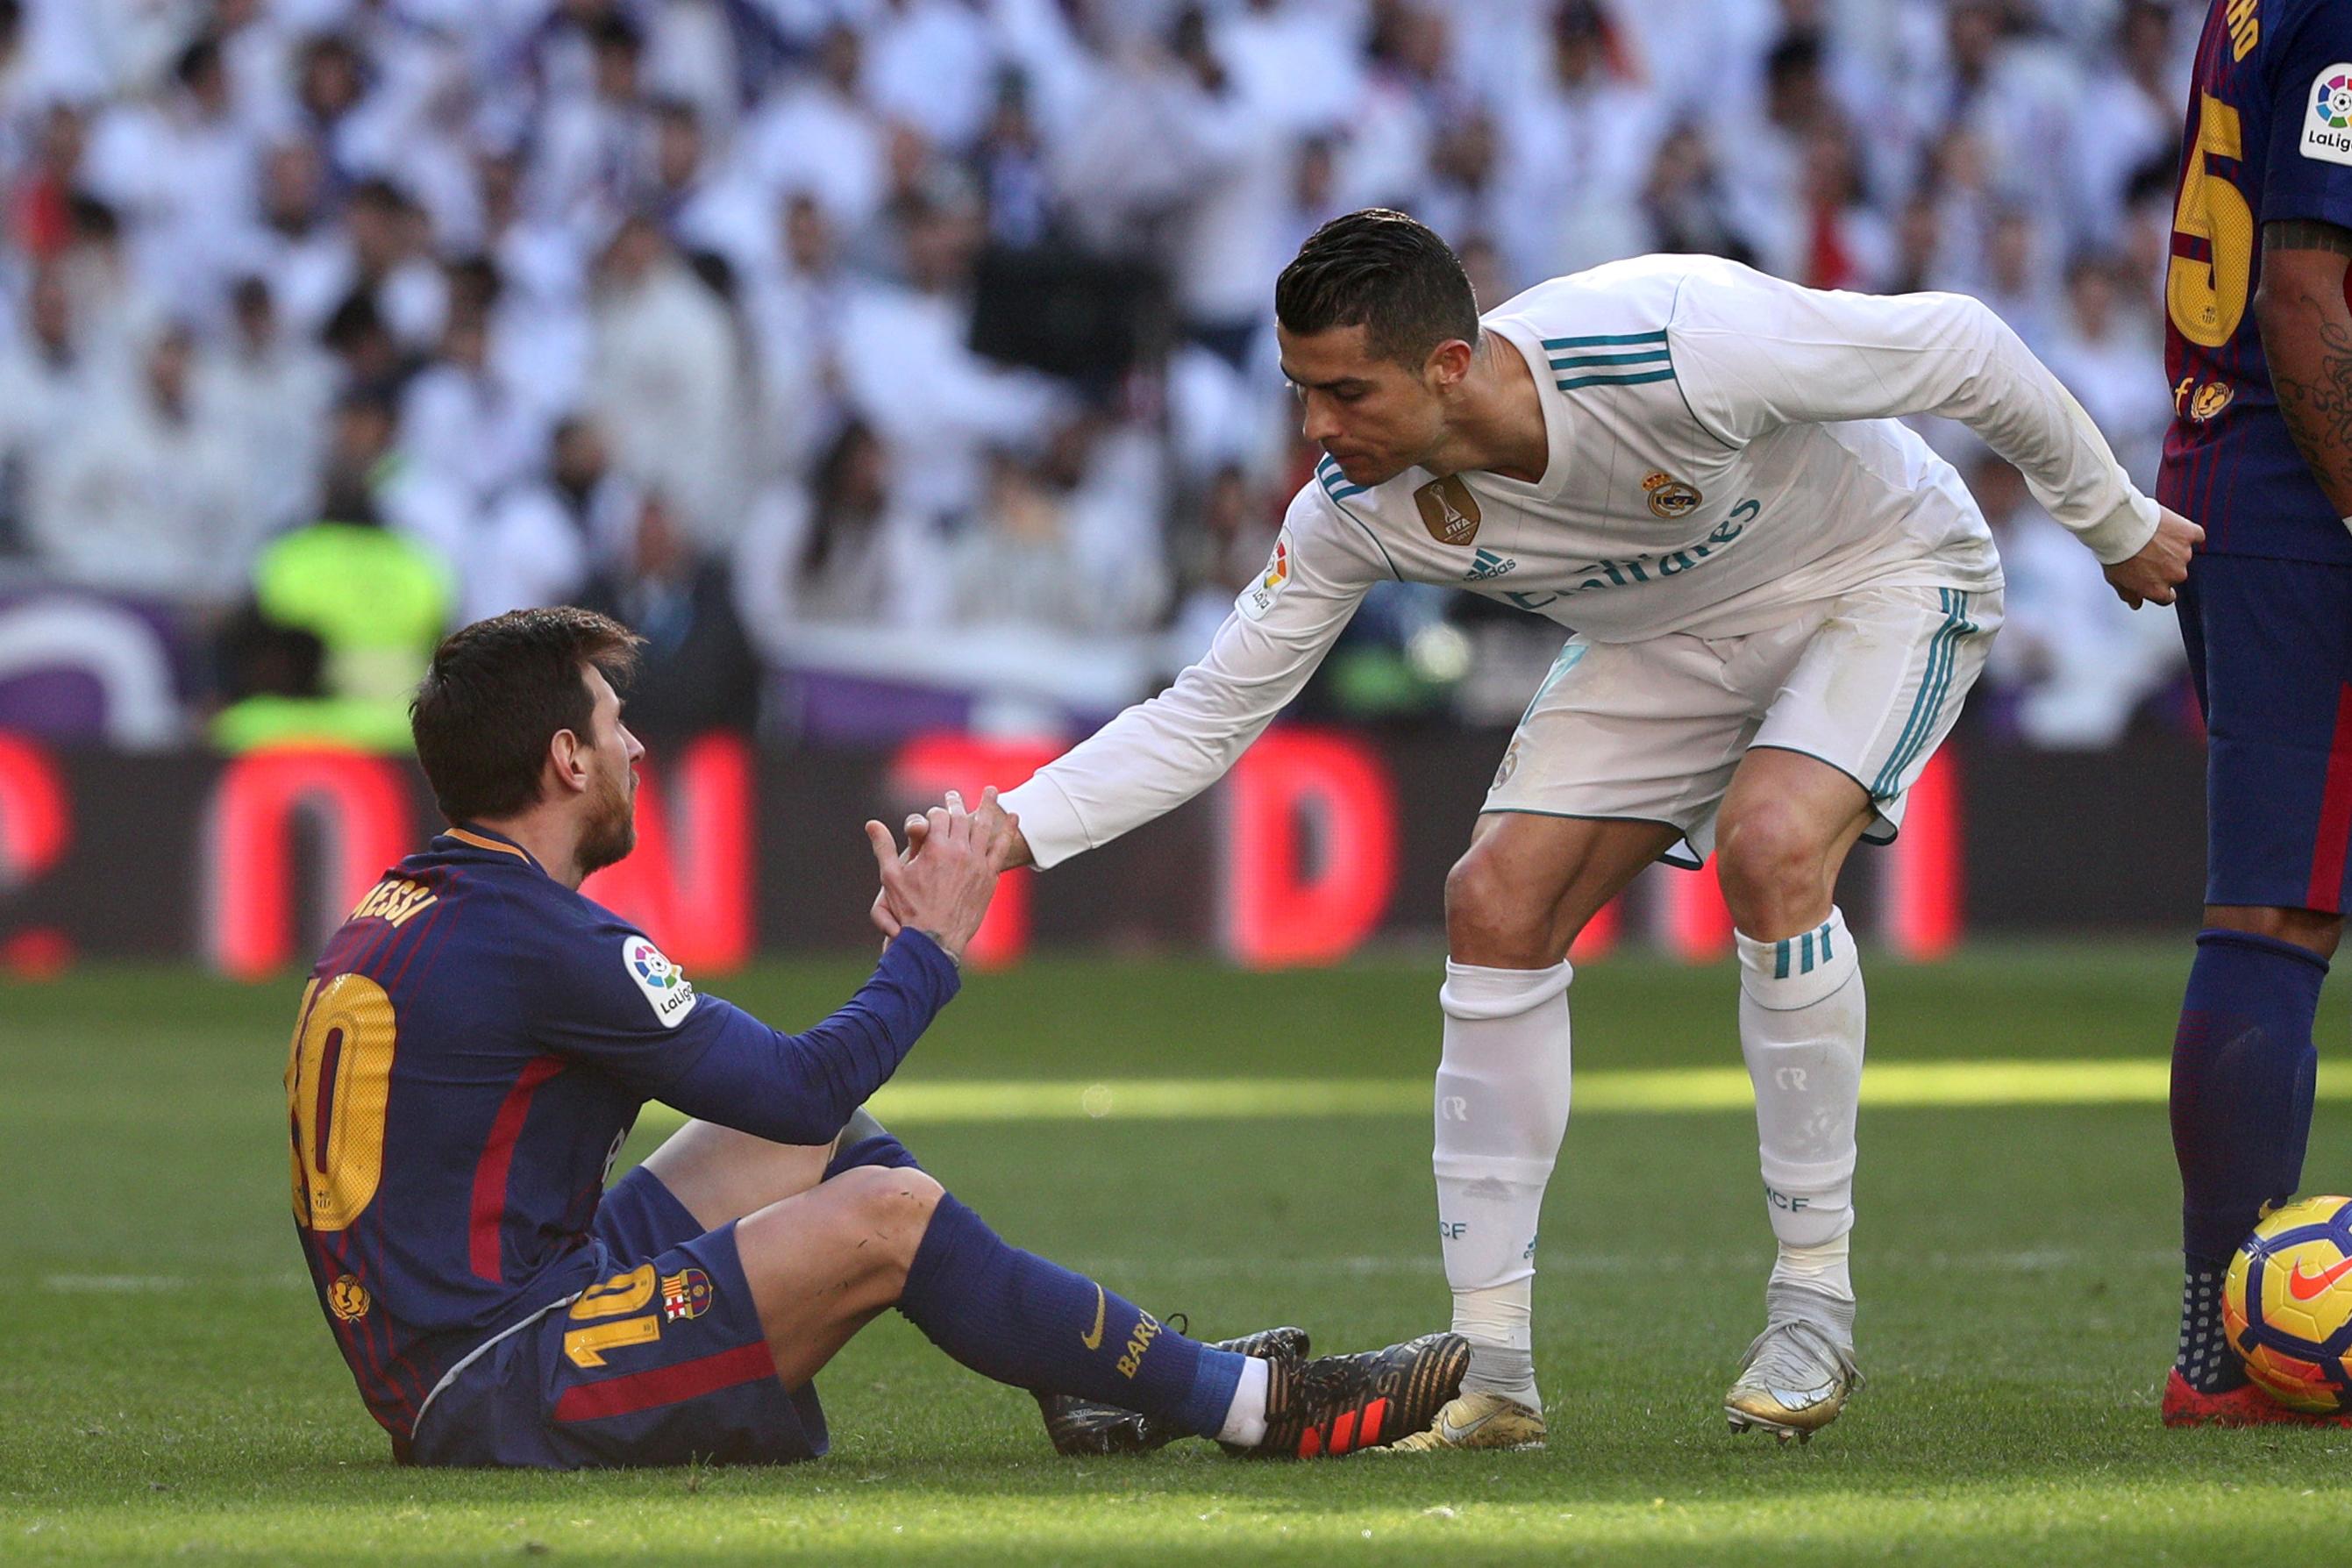 Psg Want To Sign Cristiano Ronaldo To Partner Messi